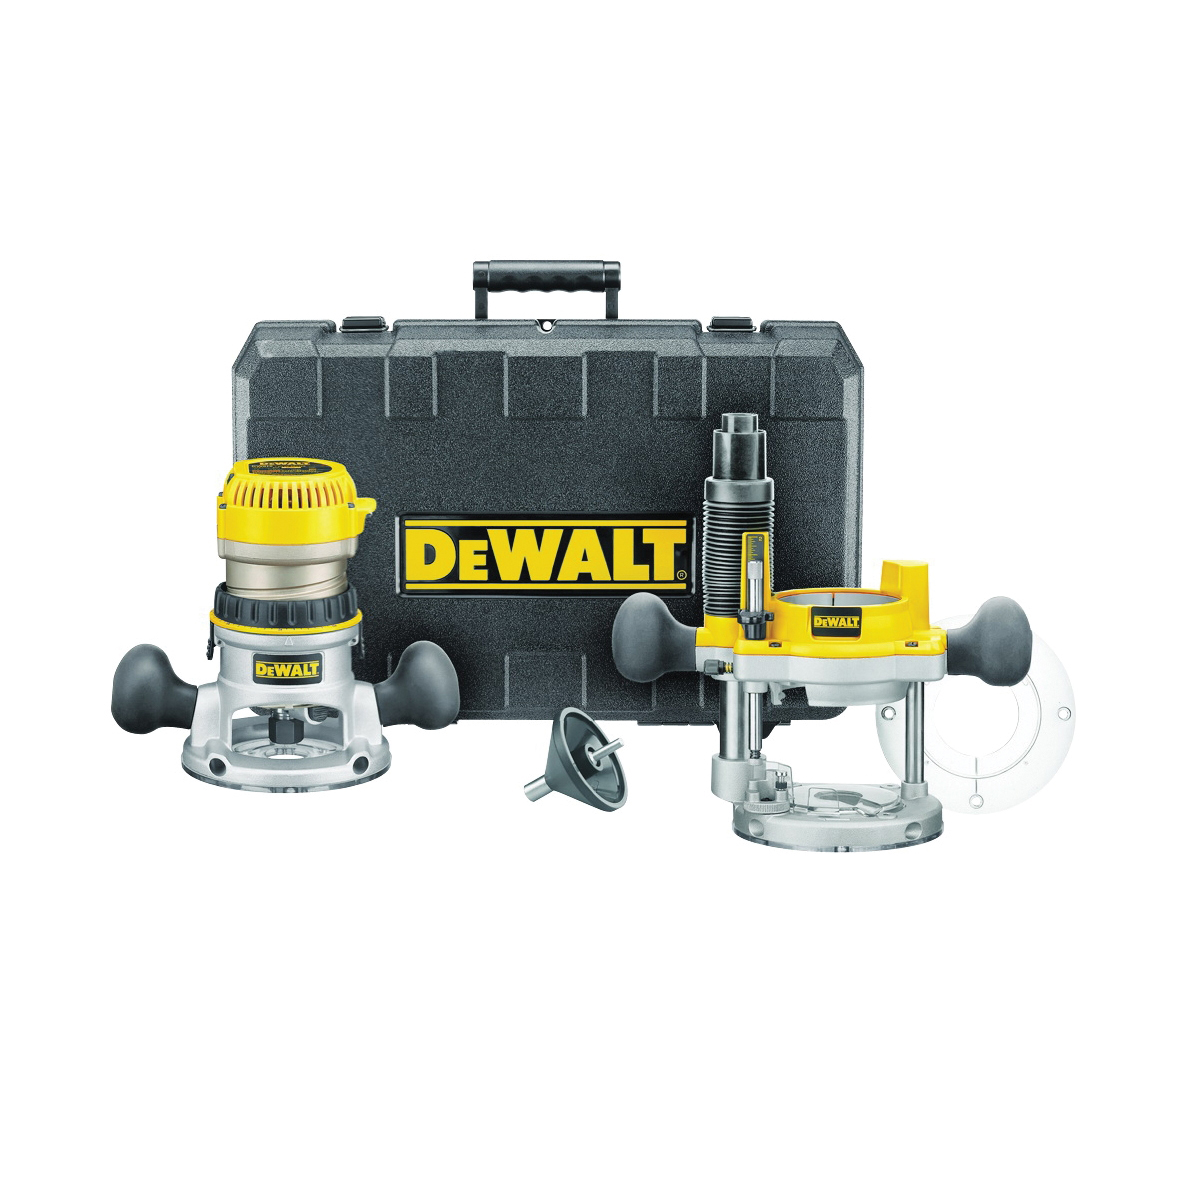 DeWALT DW618PK Fixed Base Router Combination Kit, 12 A, 8000 to 24,000 rpm Load Speed, 2-1/2 in Max Stroke - 1